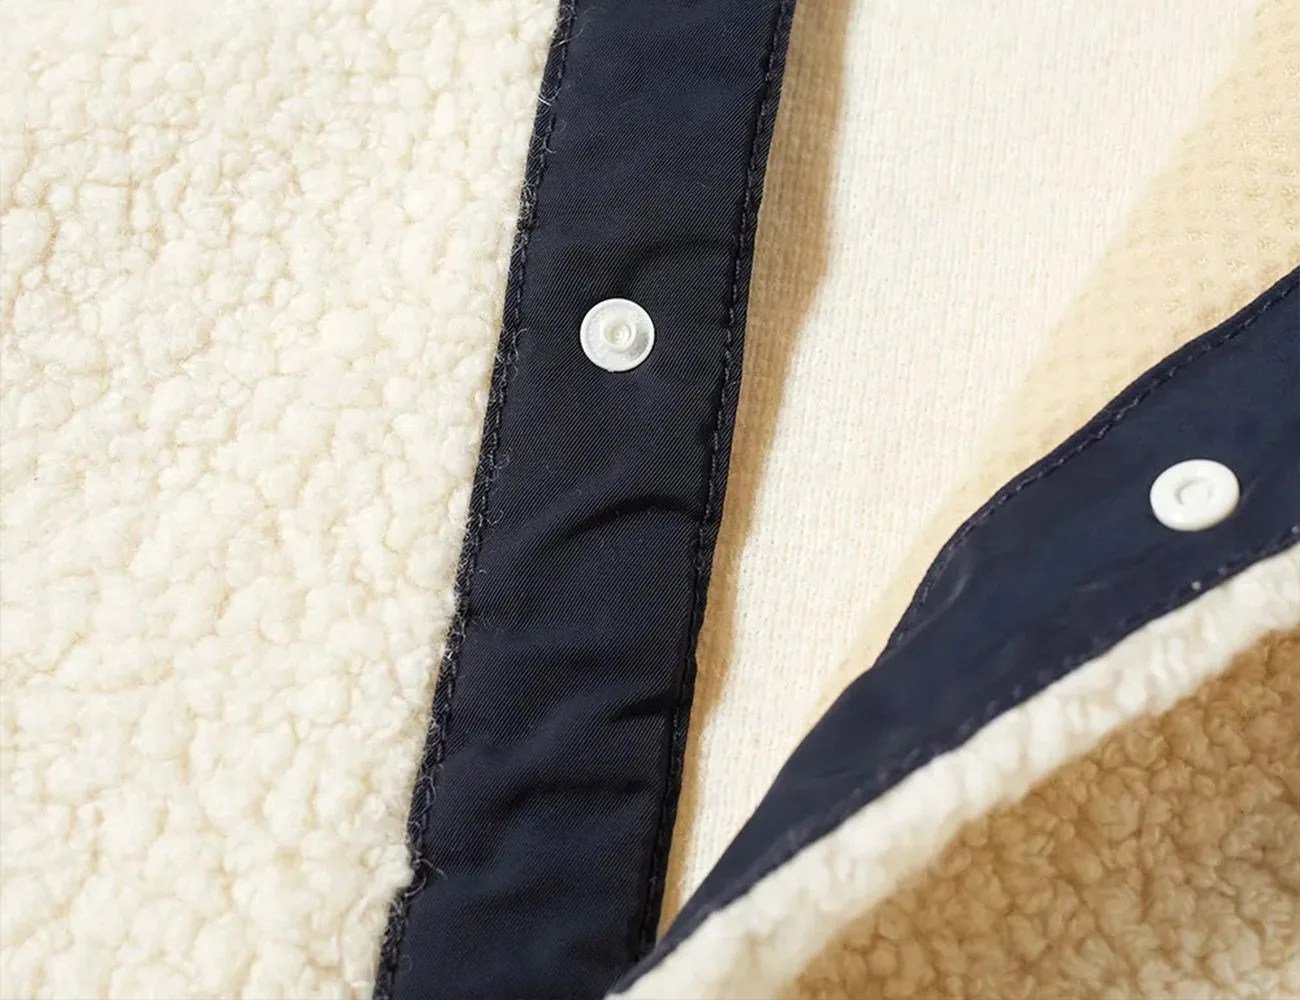 It’s Sad, but True: Your Favorite Fleece Jacket Is Bad for the Environment